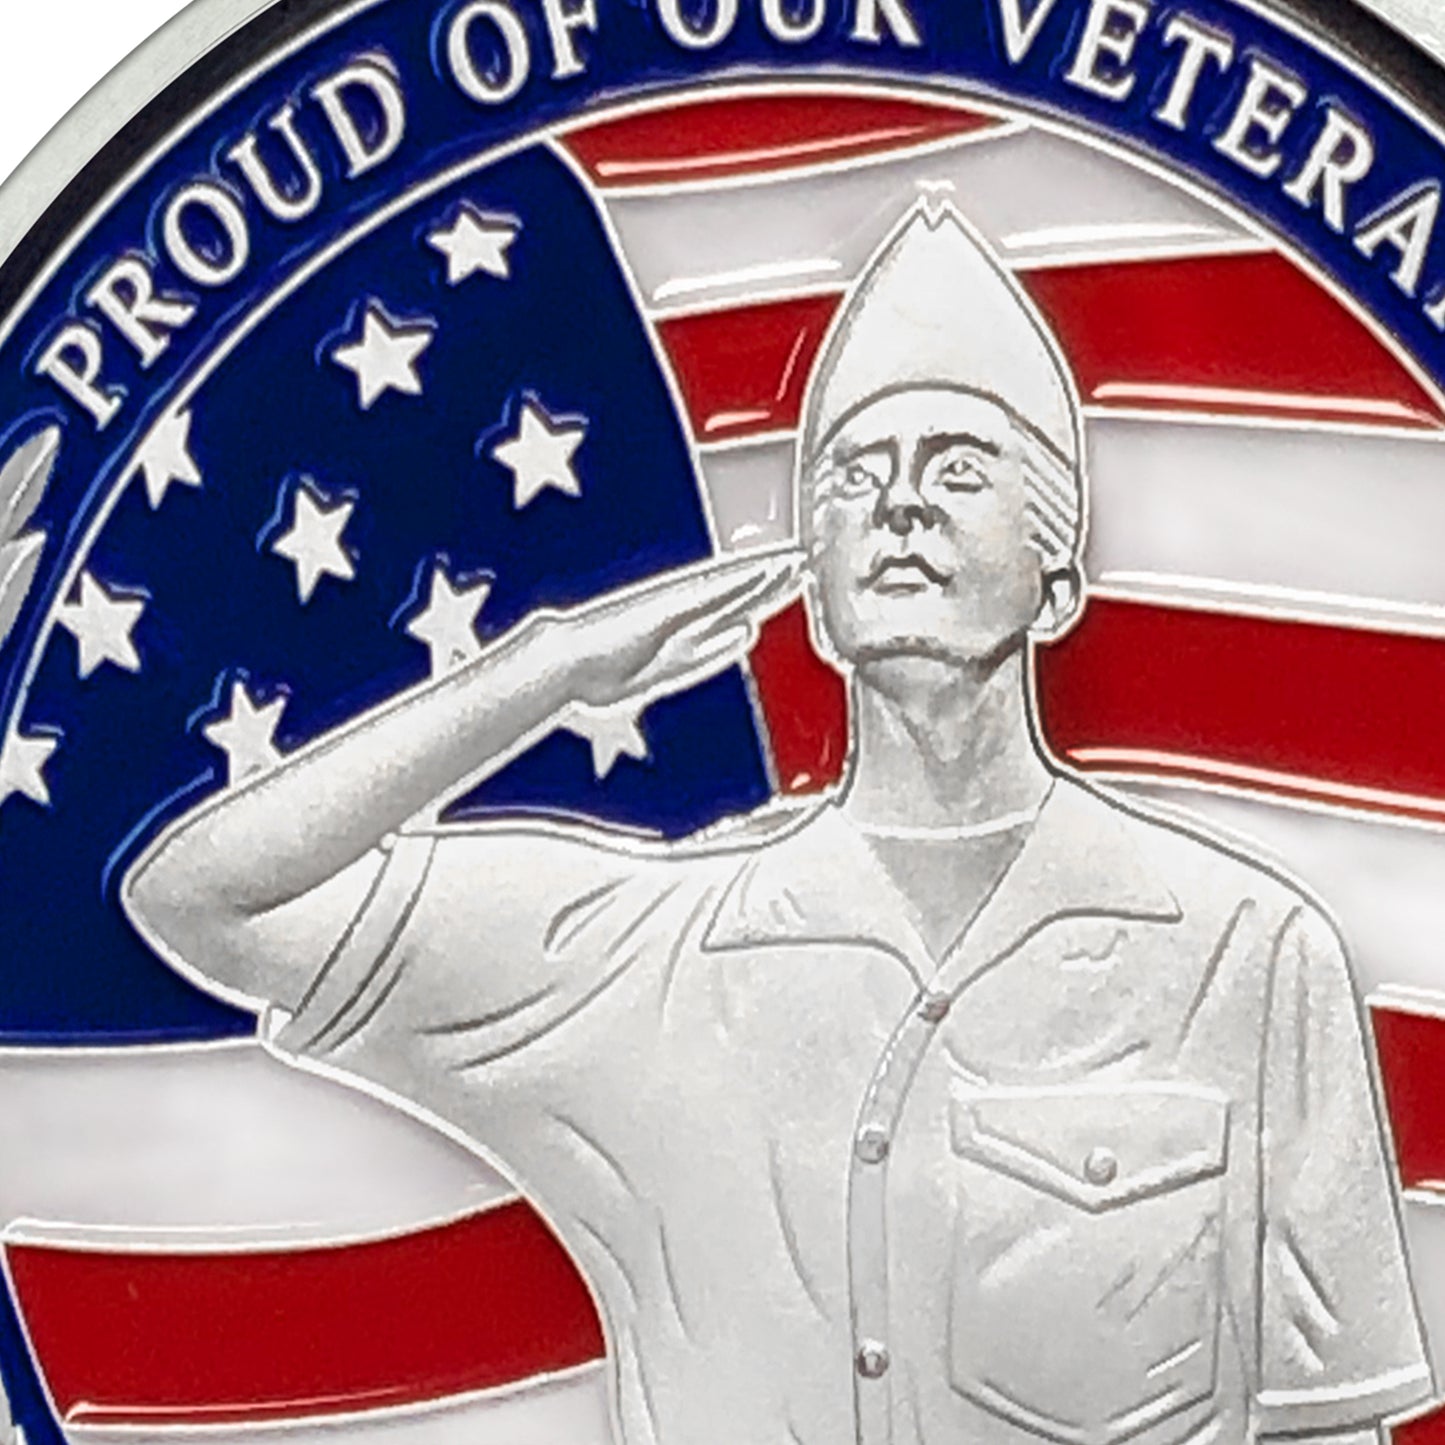 Salute to Veterans Challenge Coin Sliver Military Coin